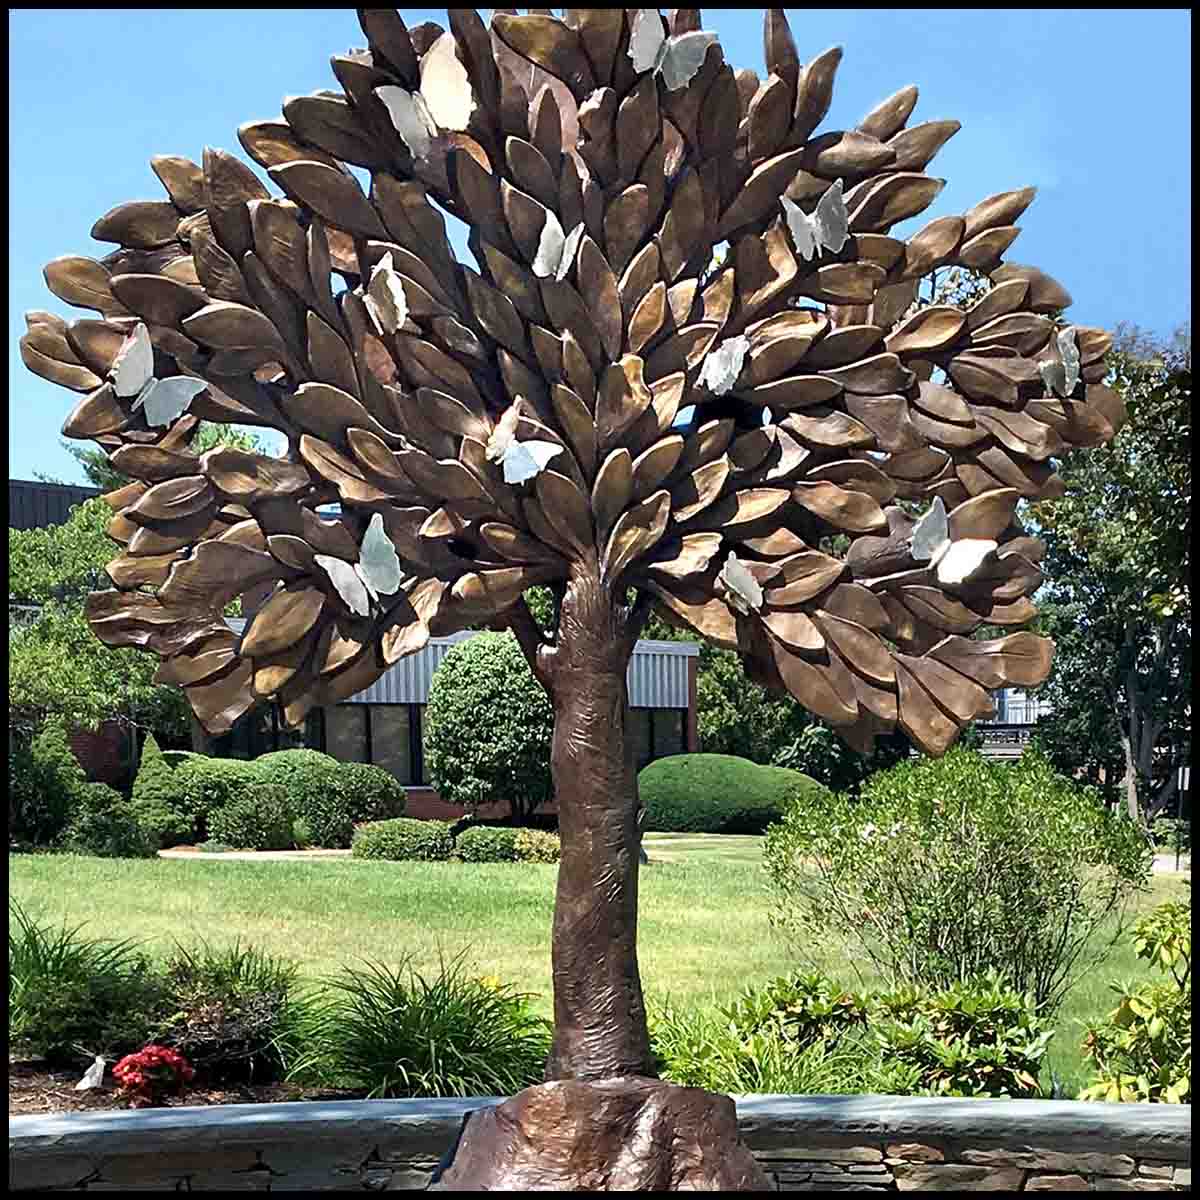 closeup photo of bronze-colored tree sculpture on granite base in hardscaped plaza surrounded by landscaping with building in background